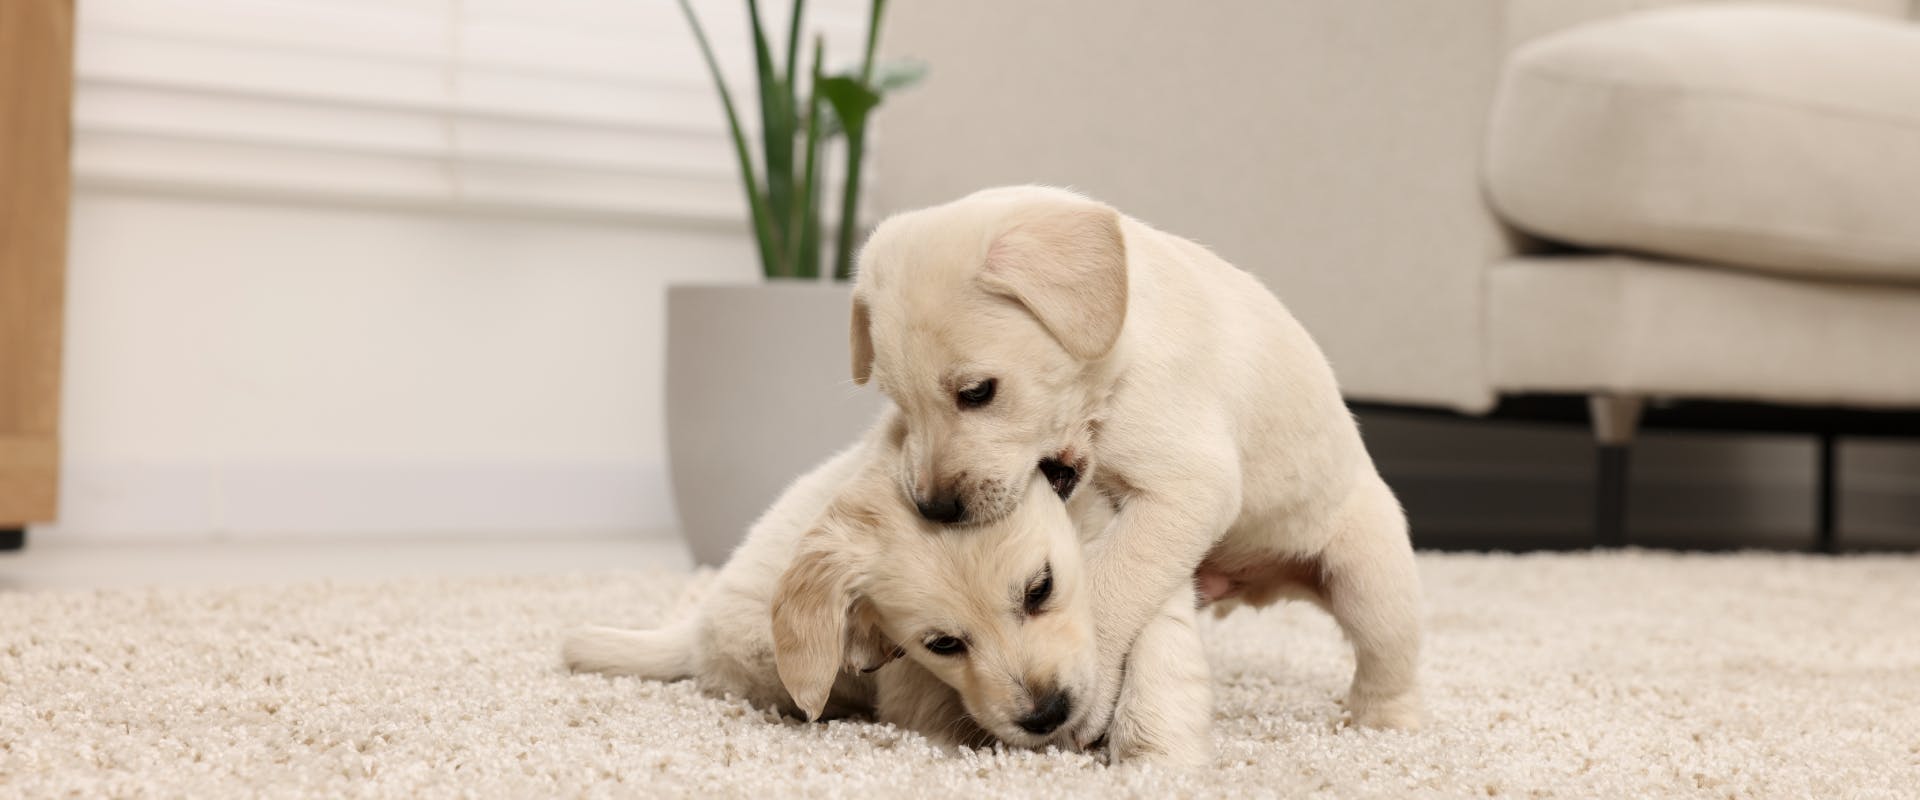 two Labrador puppies play fighting on a white carpet